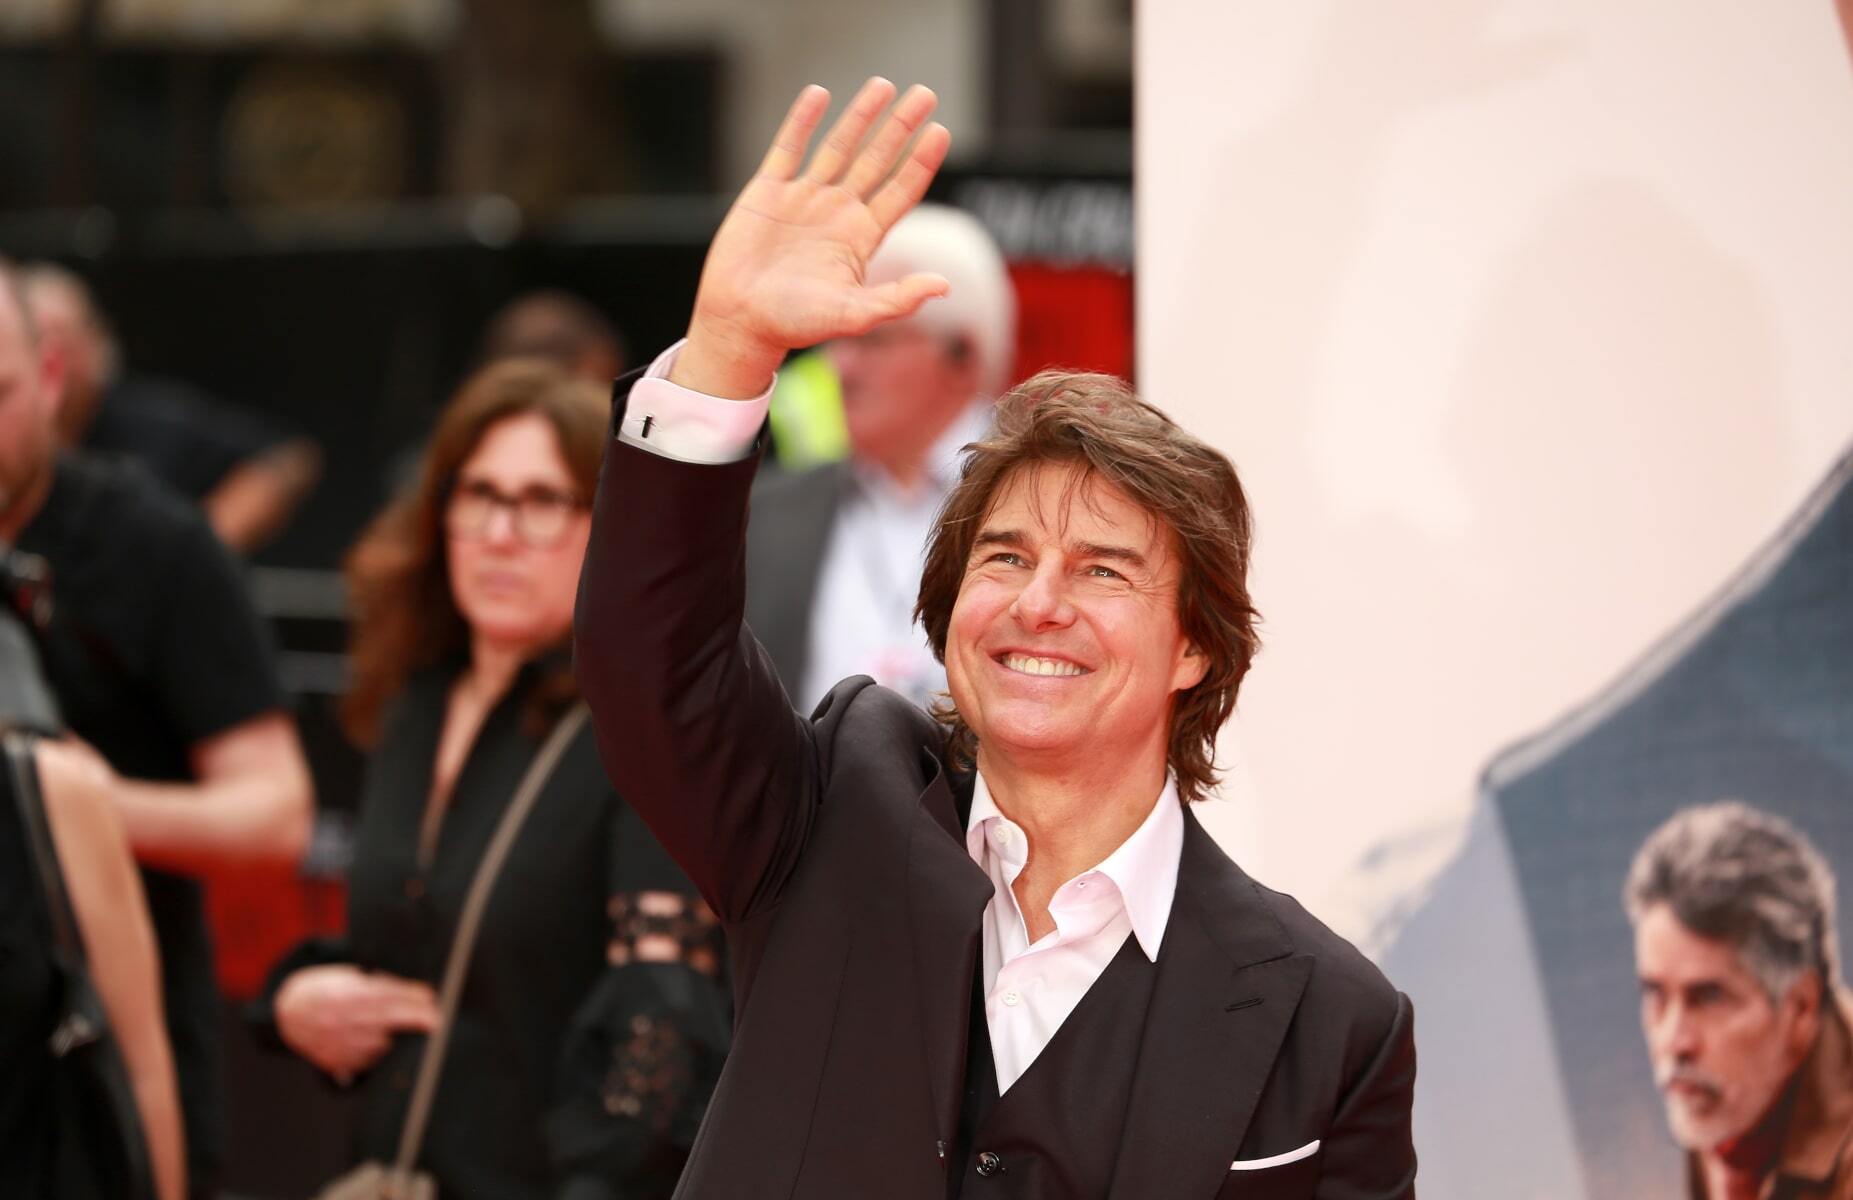 <p>Tom Cruise is one of Hollywood’s leading men, and because of his A-list good looks he’s no stranger to love affairs and adoration. Since skyrocketing to fame in the ‘80s, he’s had several high-profile relationships, including three marriages. Here we look back at his love life timeline. </p>